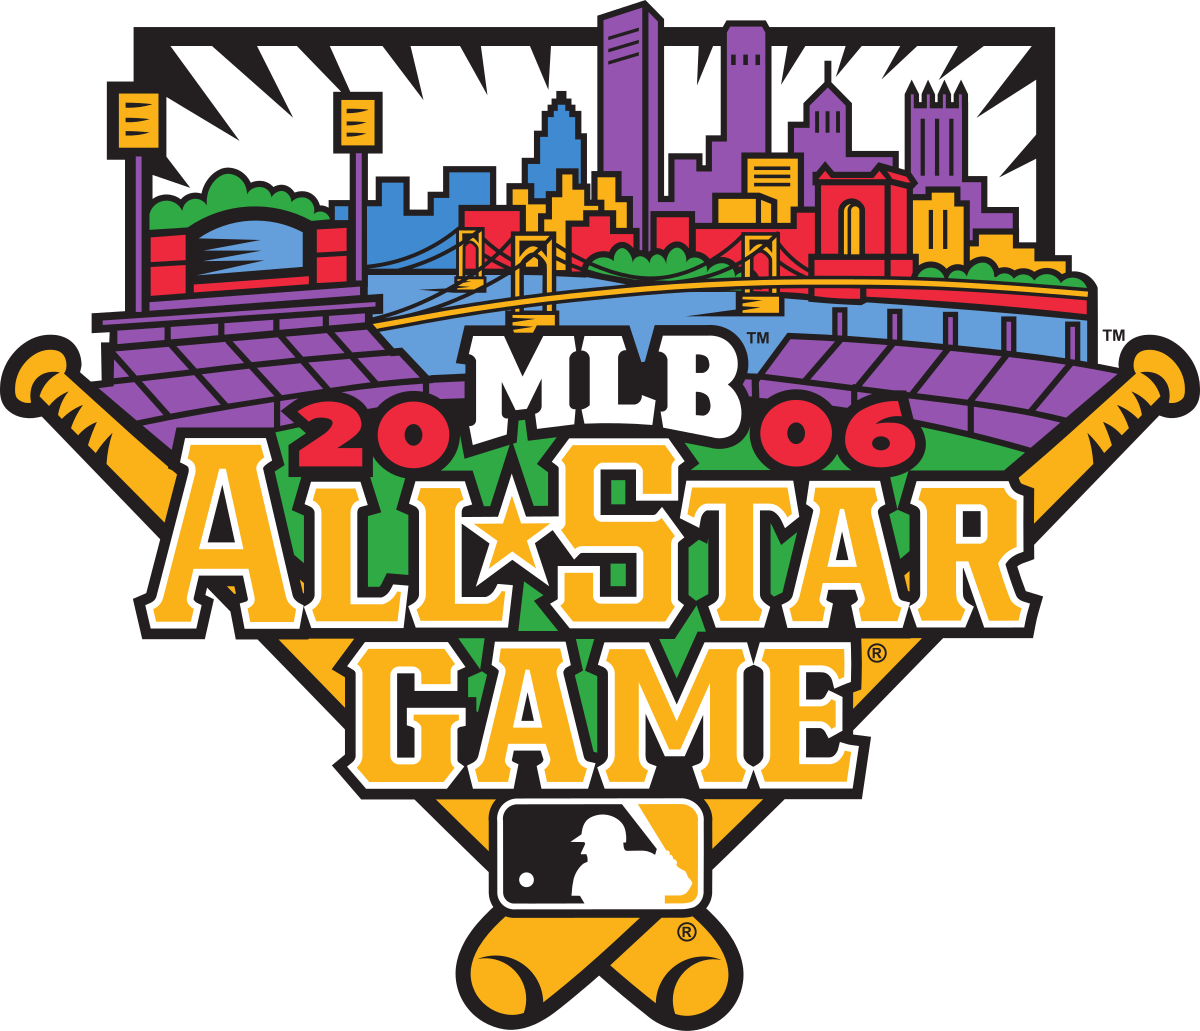 All-Star Game won by American League, 6-3